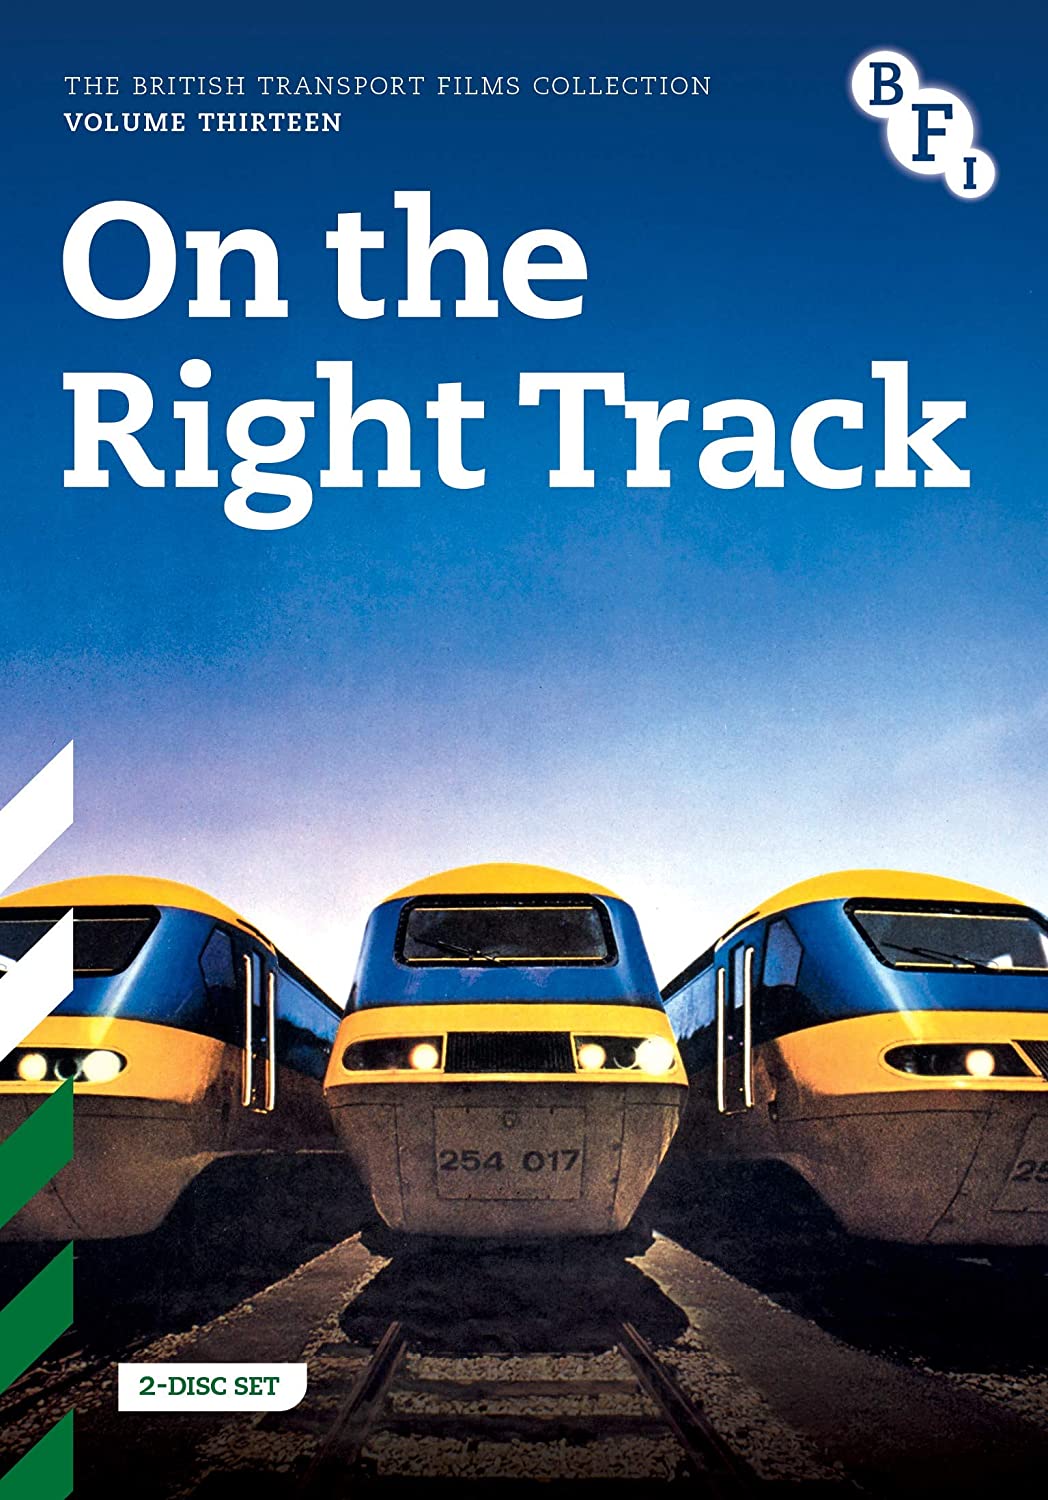 British Transport Films Collection Vol.13: On the Right Track